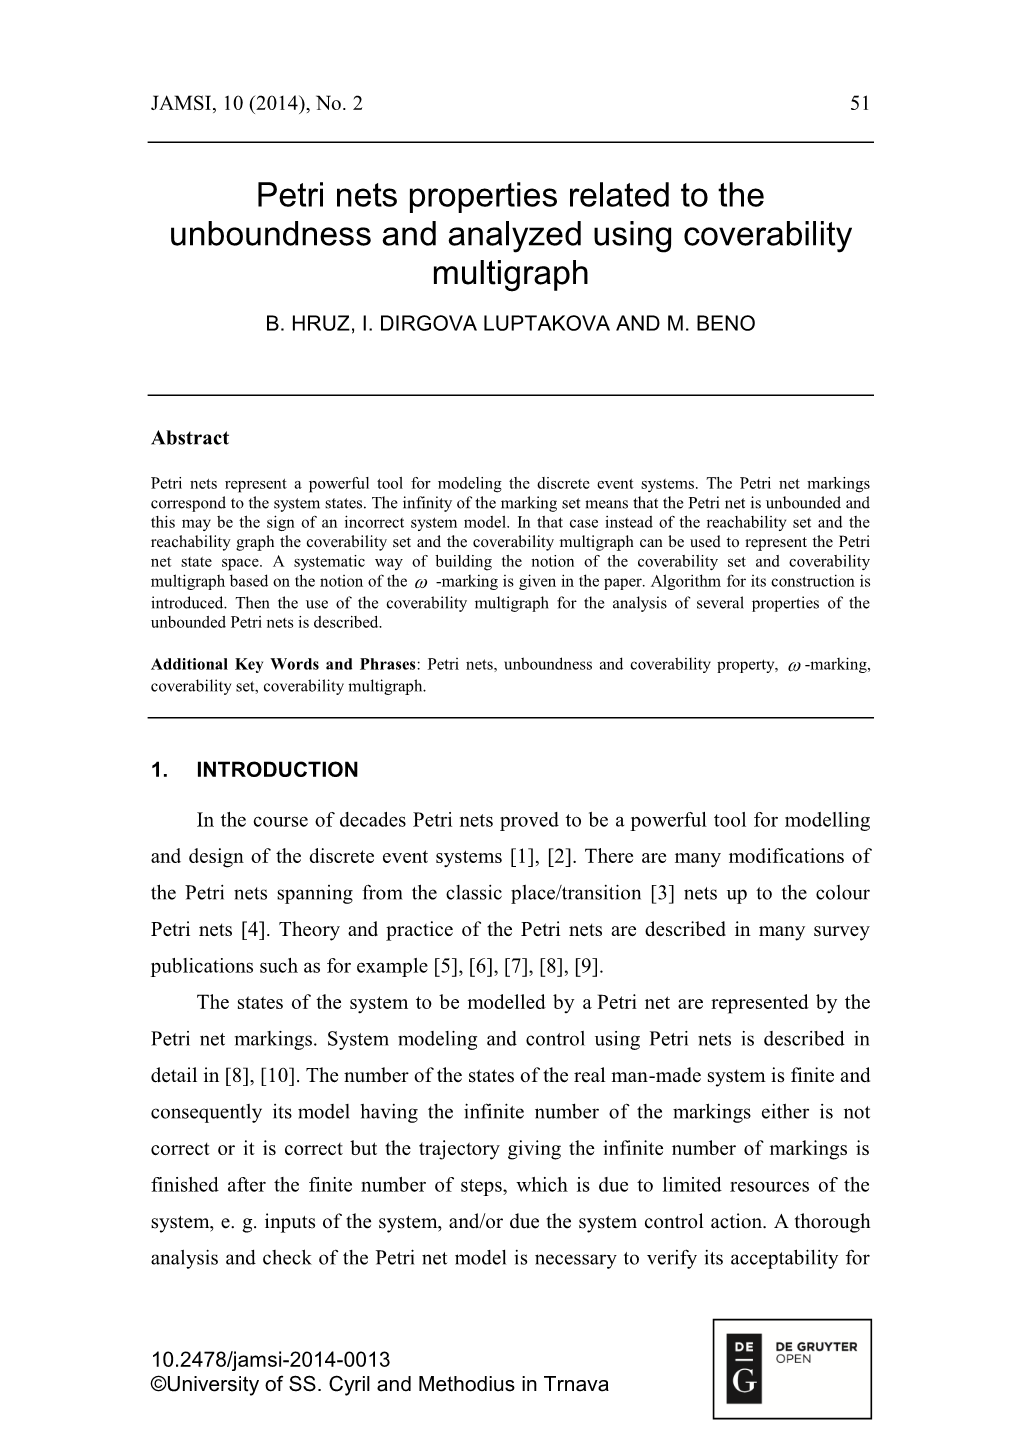 Petri Nets Properties Related to the Unboundness and Analyzed Using Coverability Multigraph